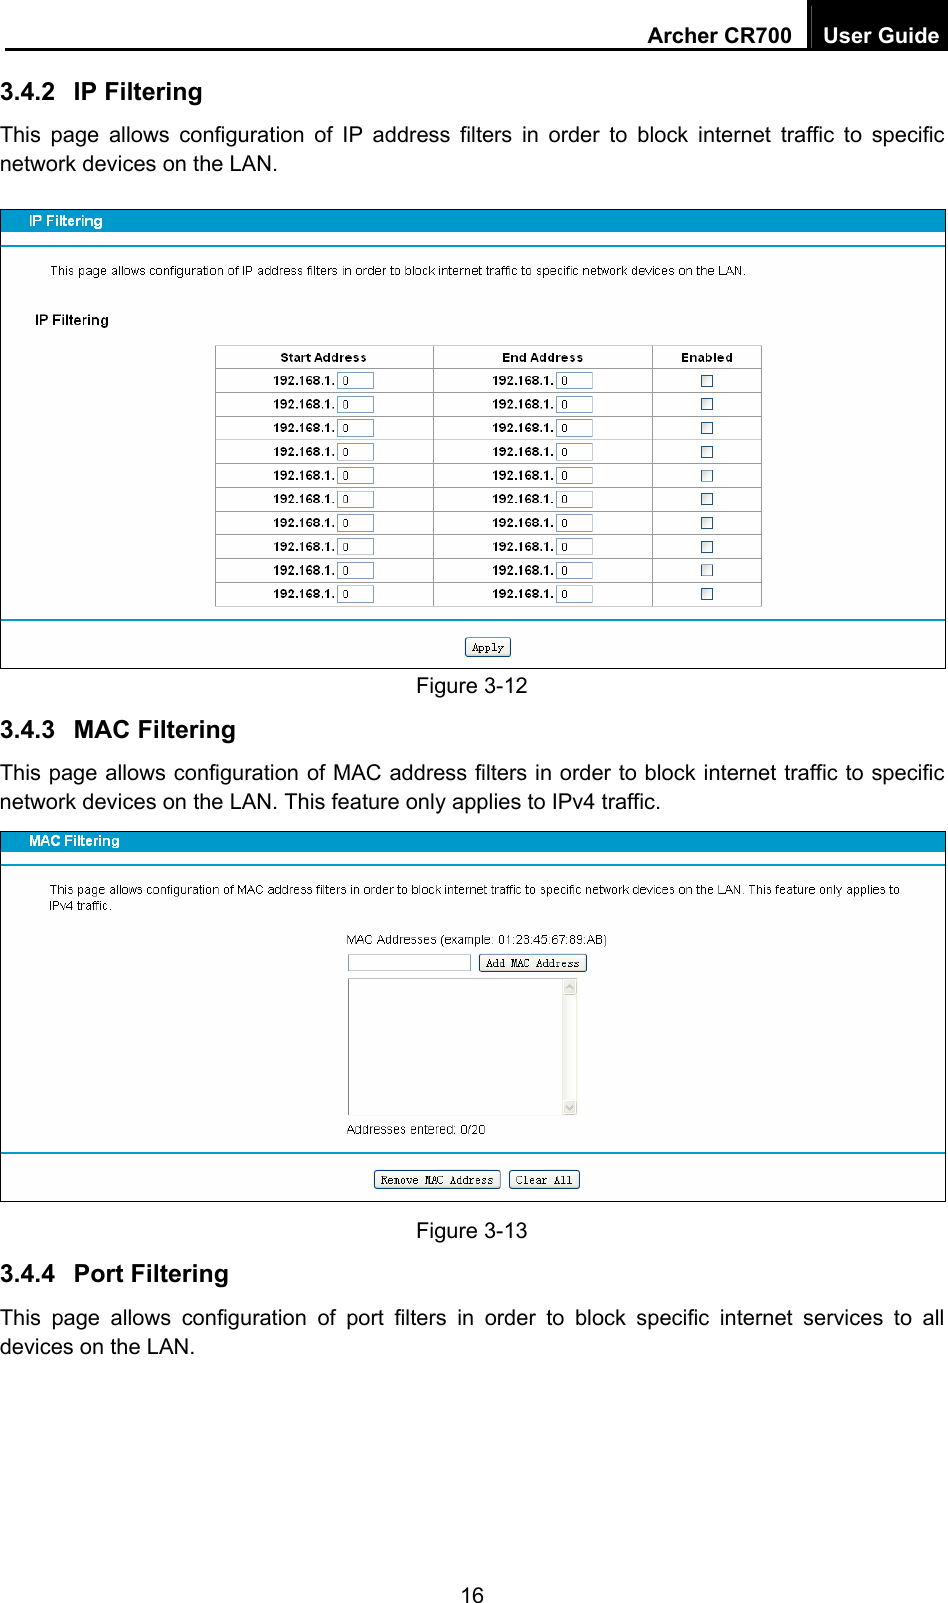 Archer CR700  User Guide 16 3.4.2  IP Filtering This page allows configuration of IP address filters in order to block internet traffic to specific network devices on the LAN.  Figure 3-12 3.4.3  MAC Filtering This page allows configuration of MAC address filters in order to block internet traffic to specific network devices on the LAN. This feature only applies to IPv4 traffic.  Figure 3-13 3.4.4  Port Filtering This page allows configuration of port filters in order to block specific internet services to all devices on the LAN. 